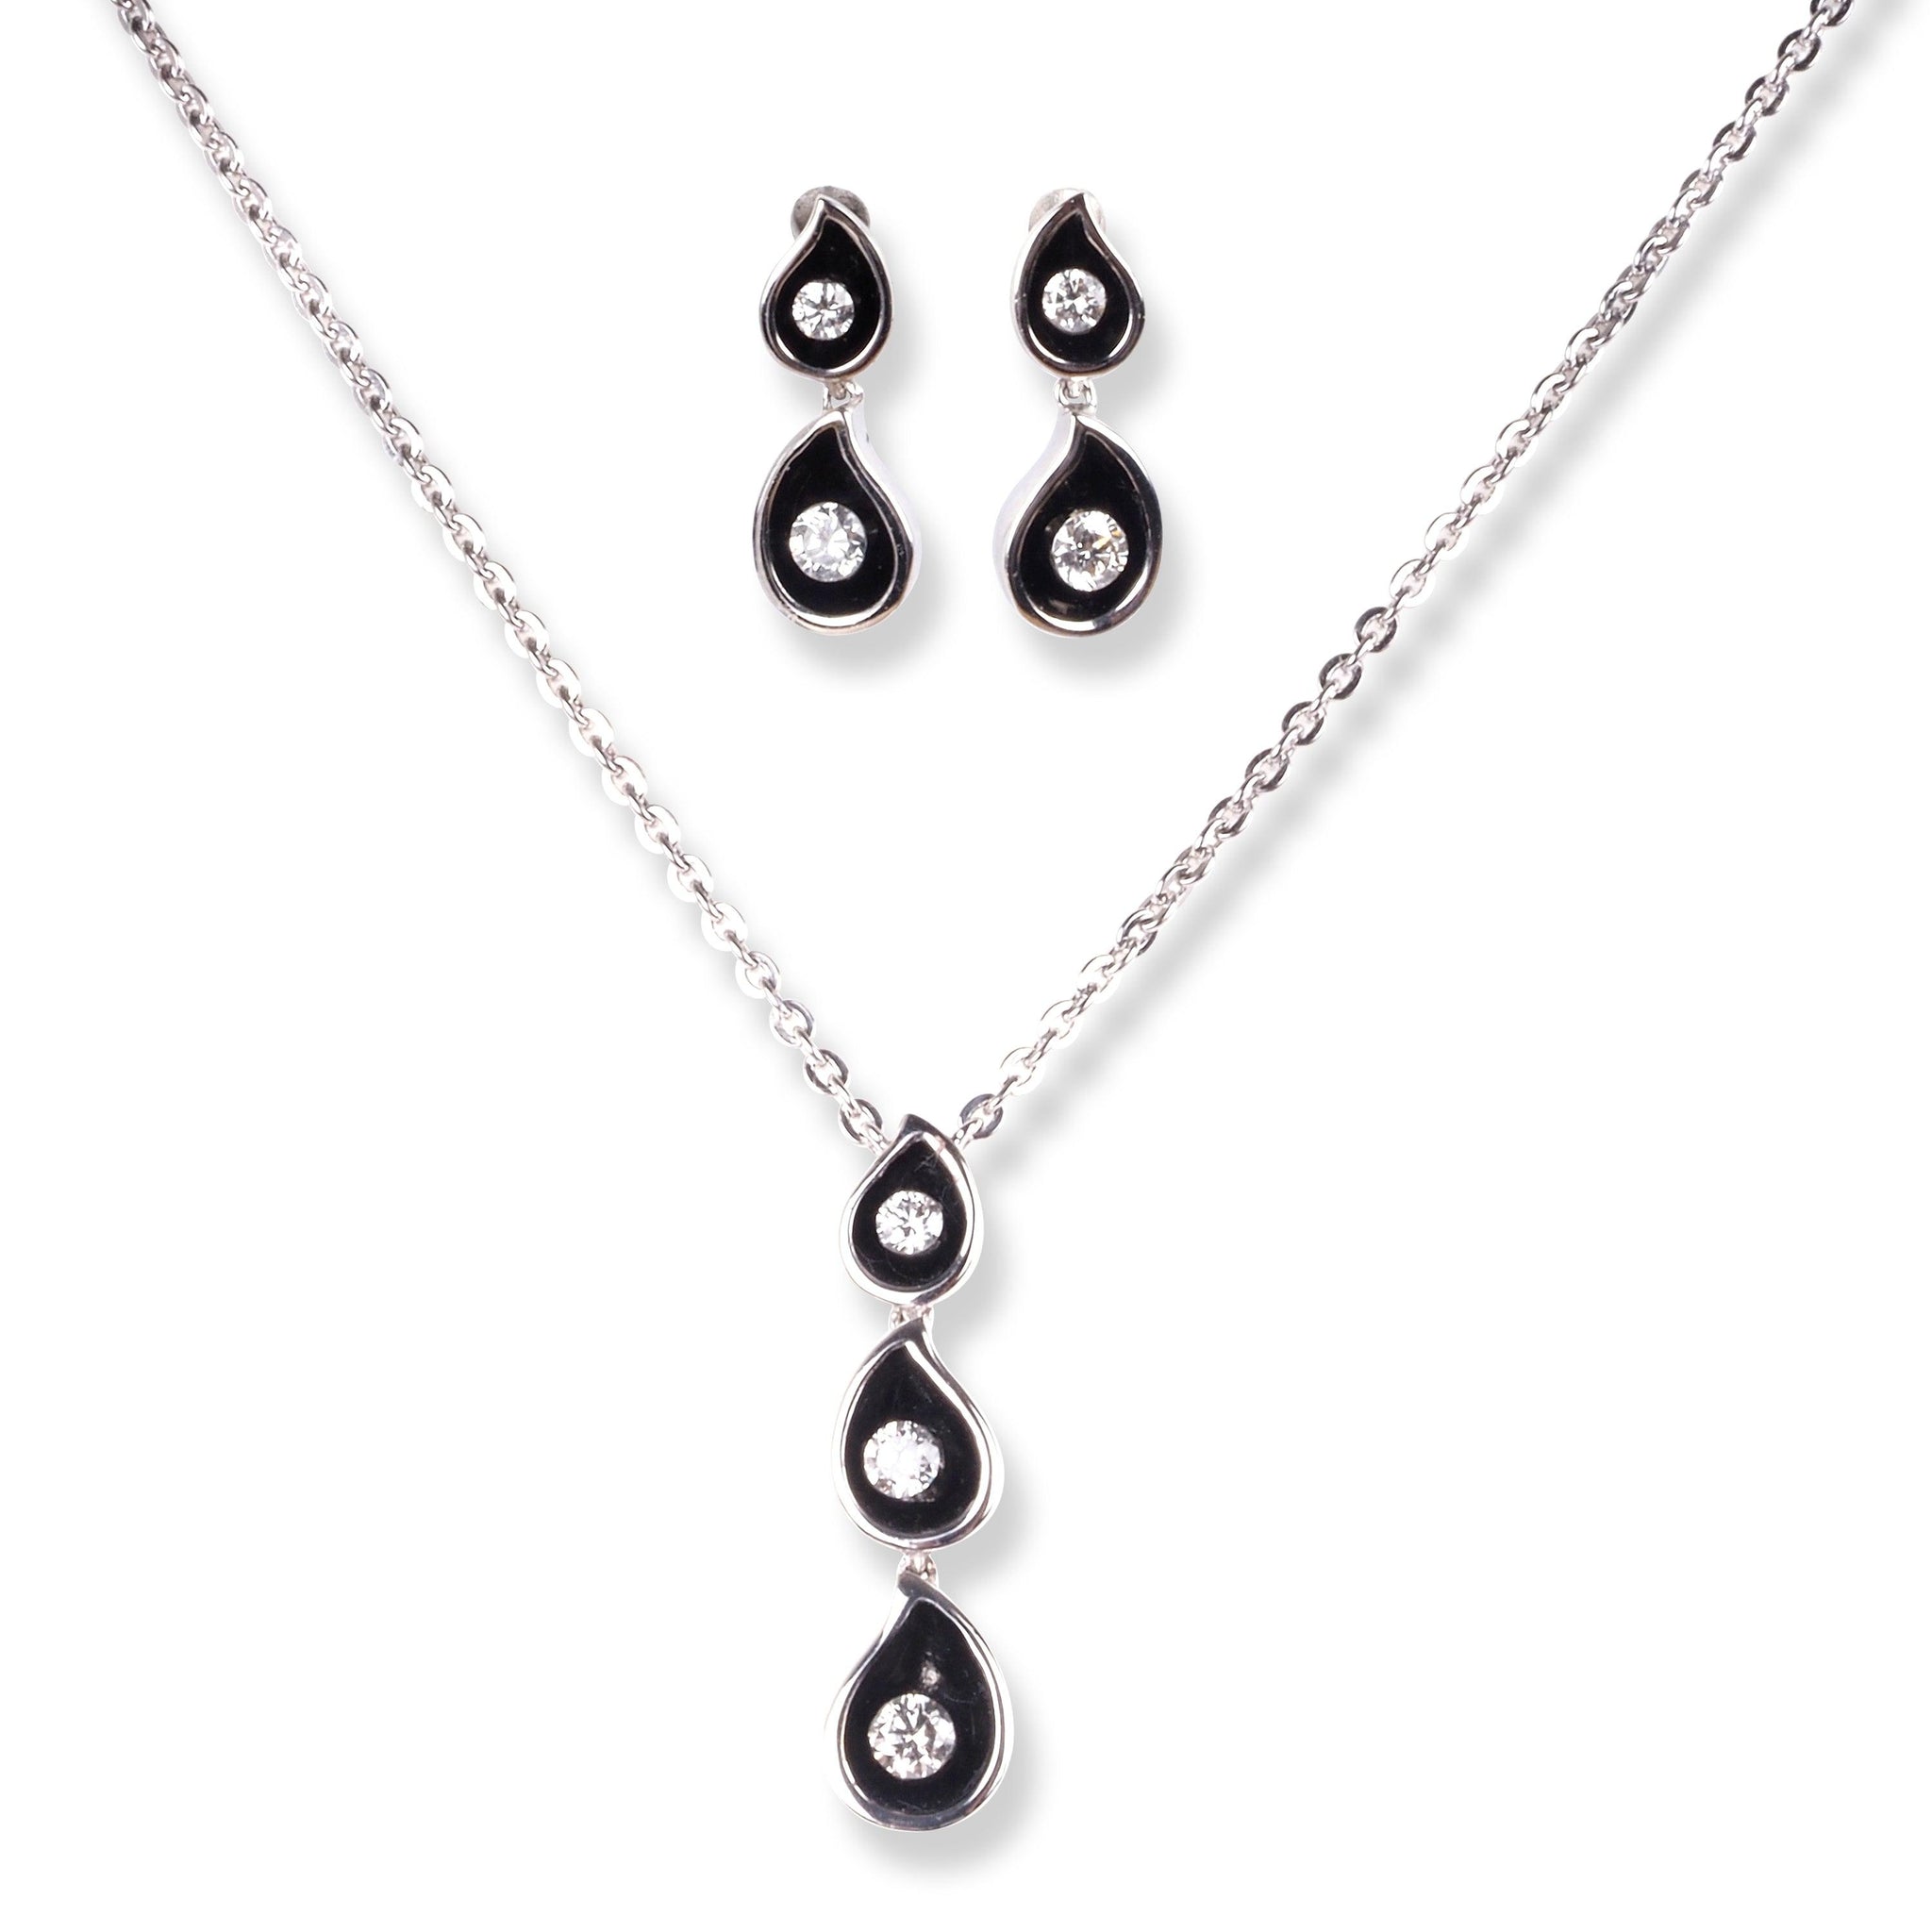 18ct White Gold Diamond Set (Necklace + Earrings)